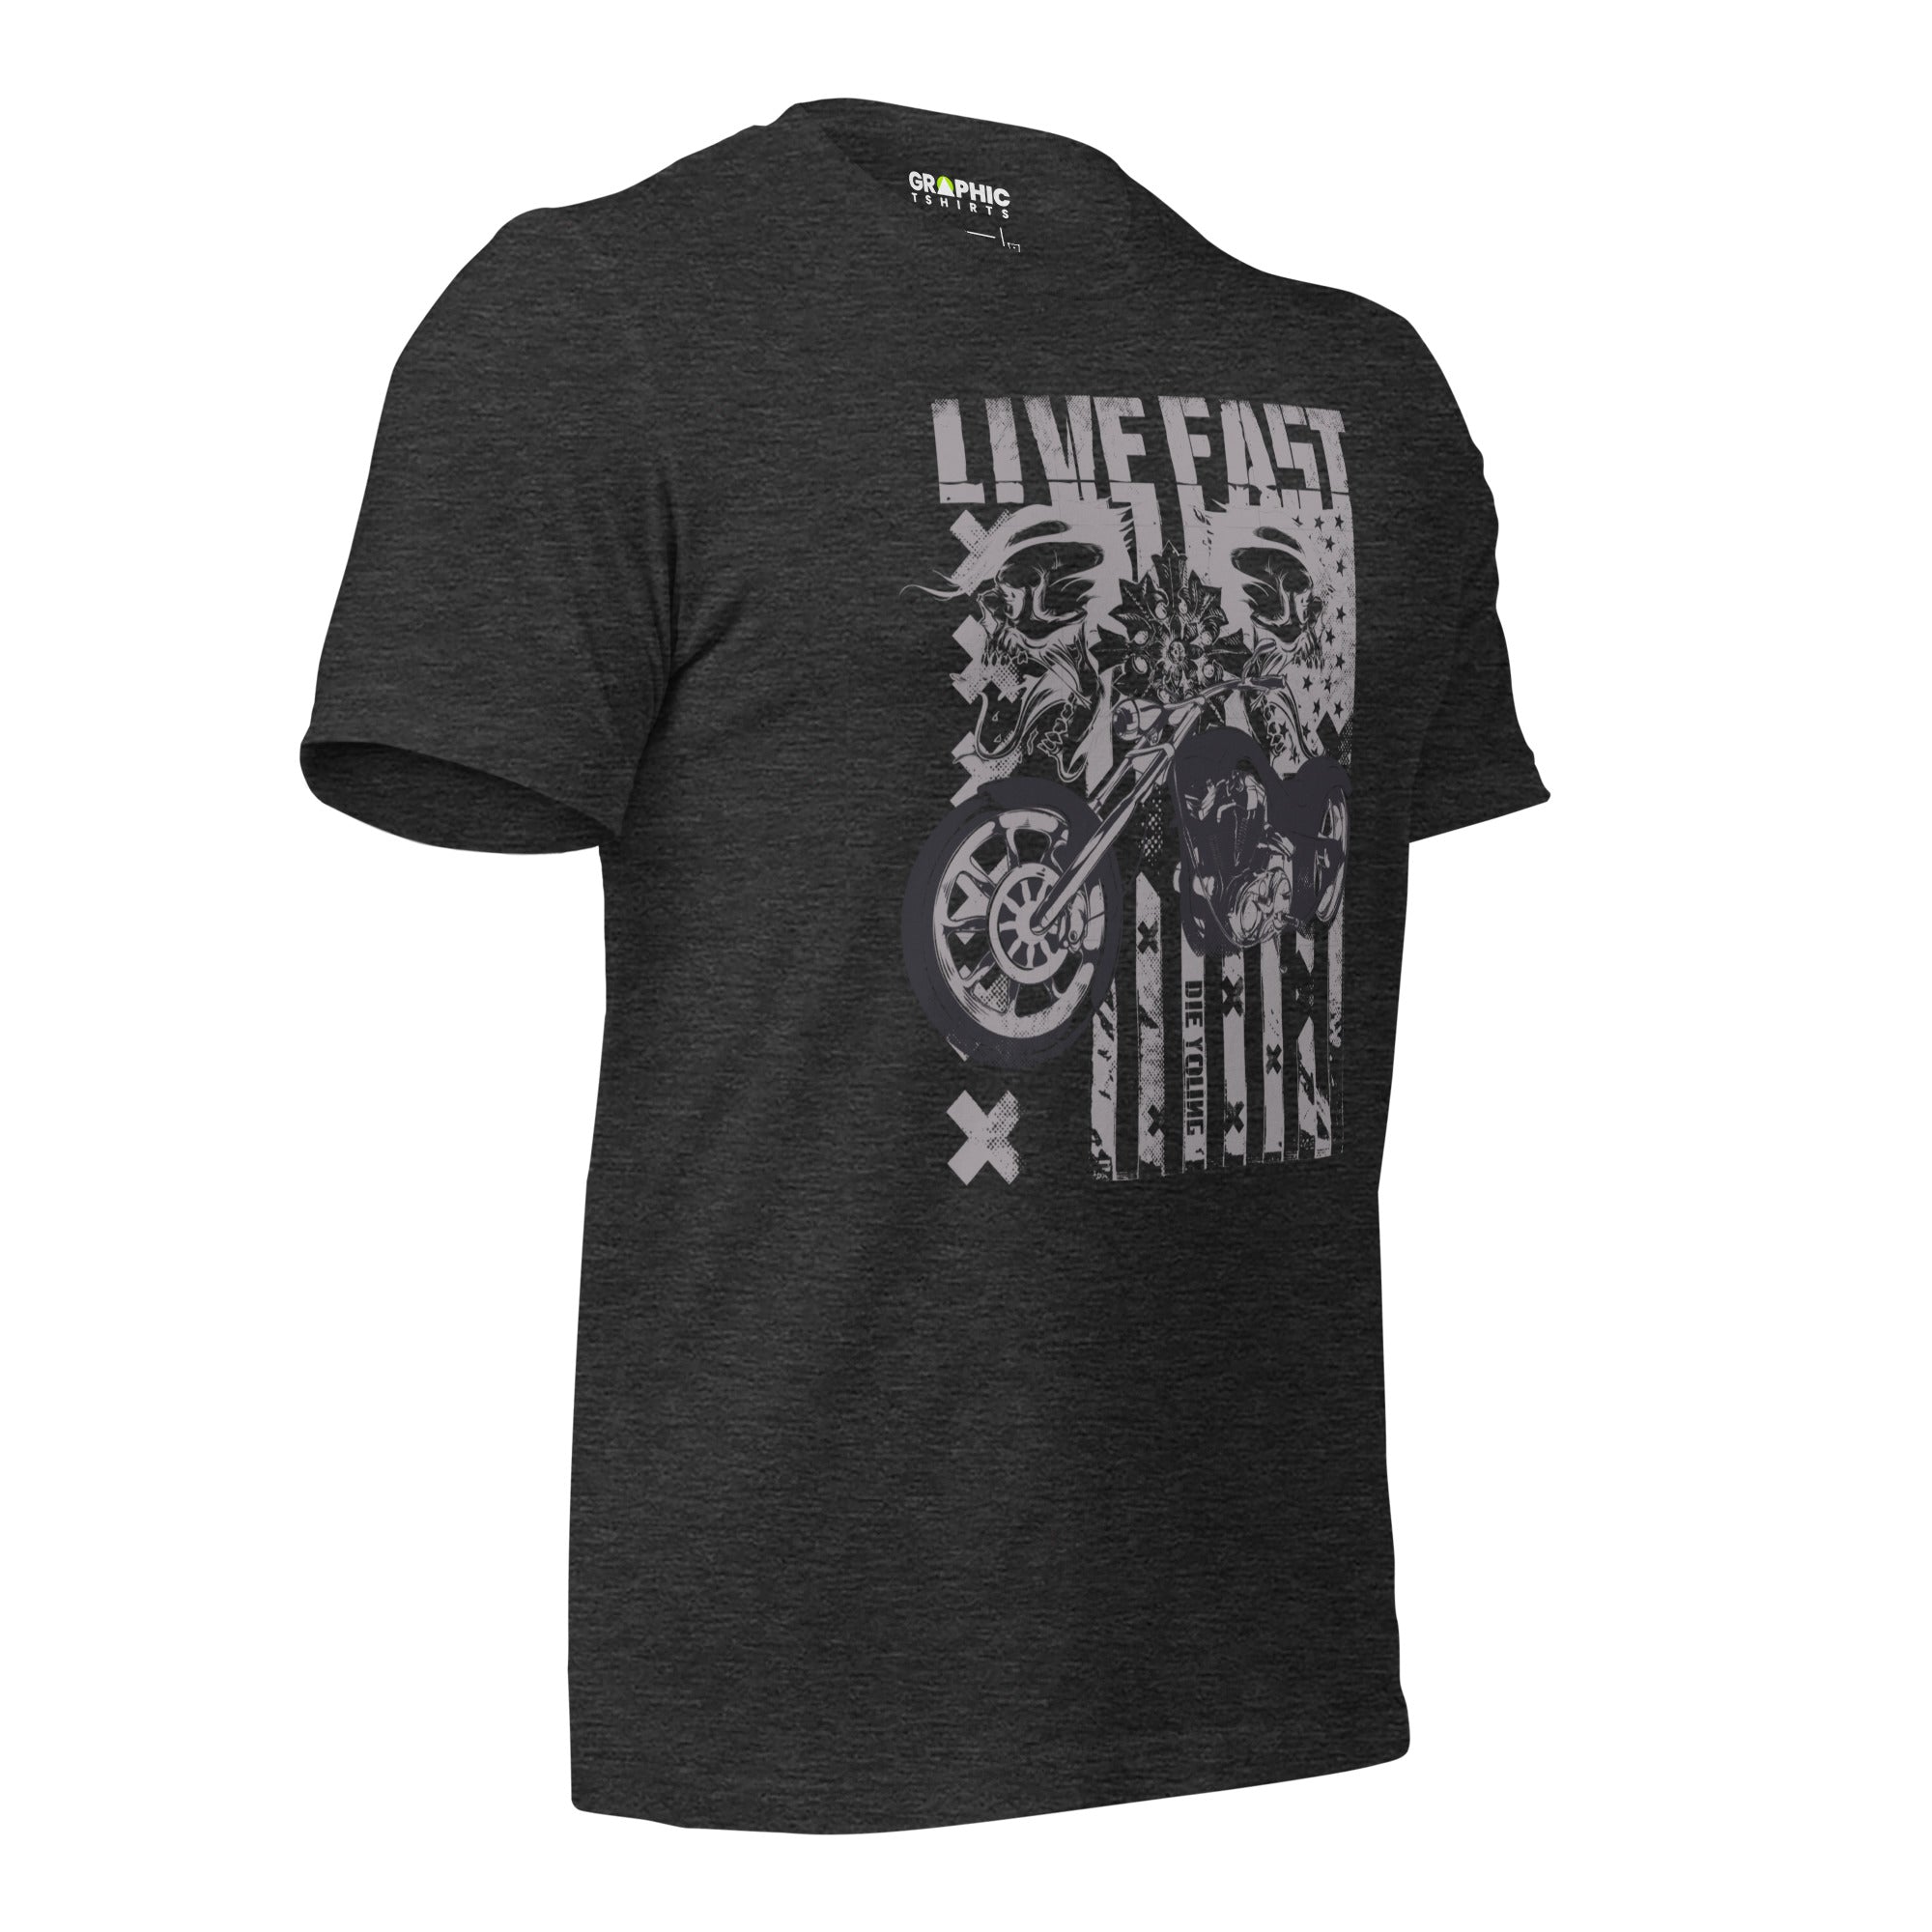 Unisex Staple T-Shirt - Live Fast Motorcycle - GRAPHIC T-SHIRTS